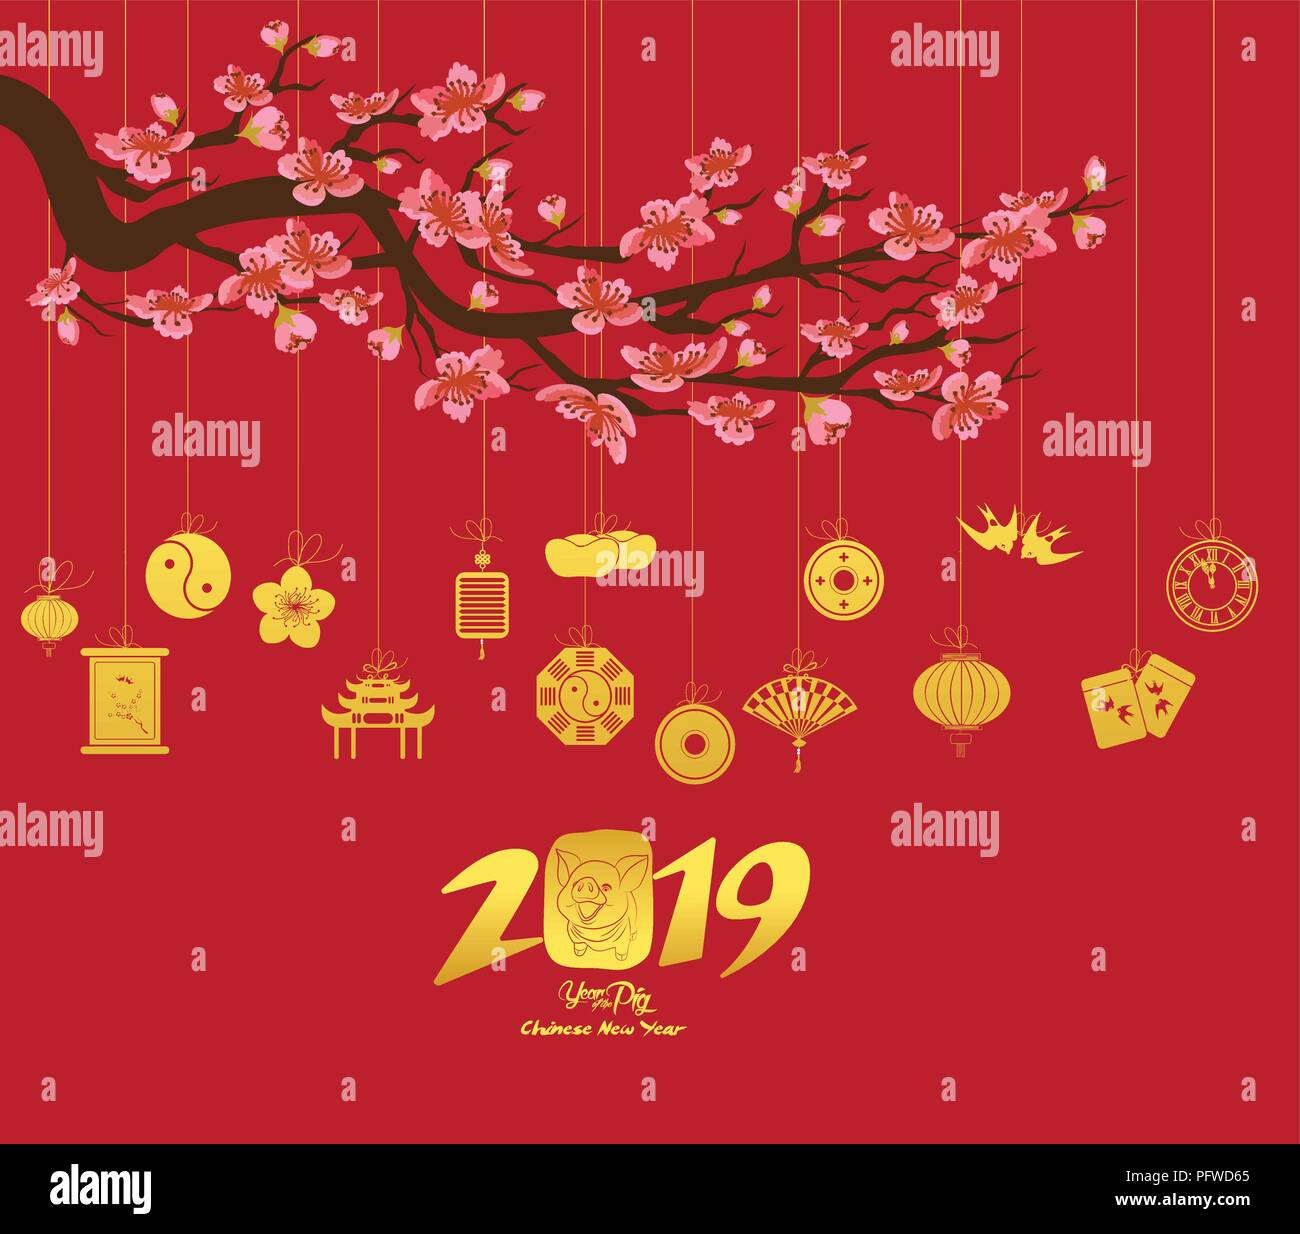 Chinese new year 2019 with lantern. Year of the pig Stock Vector